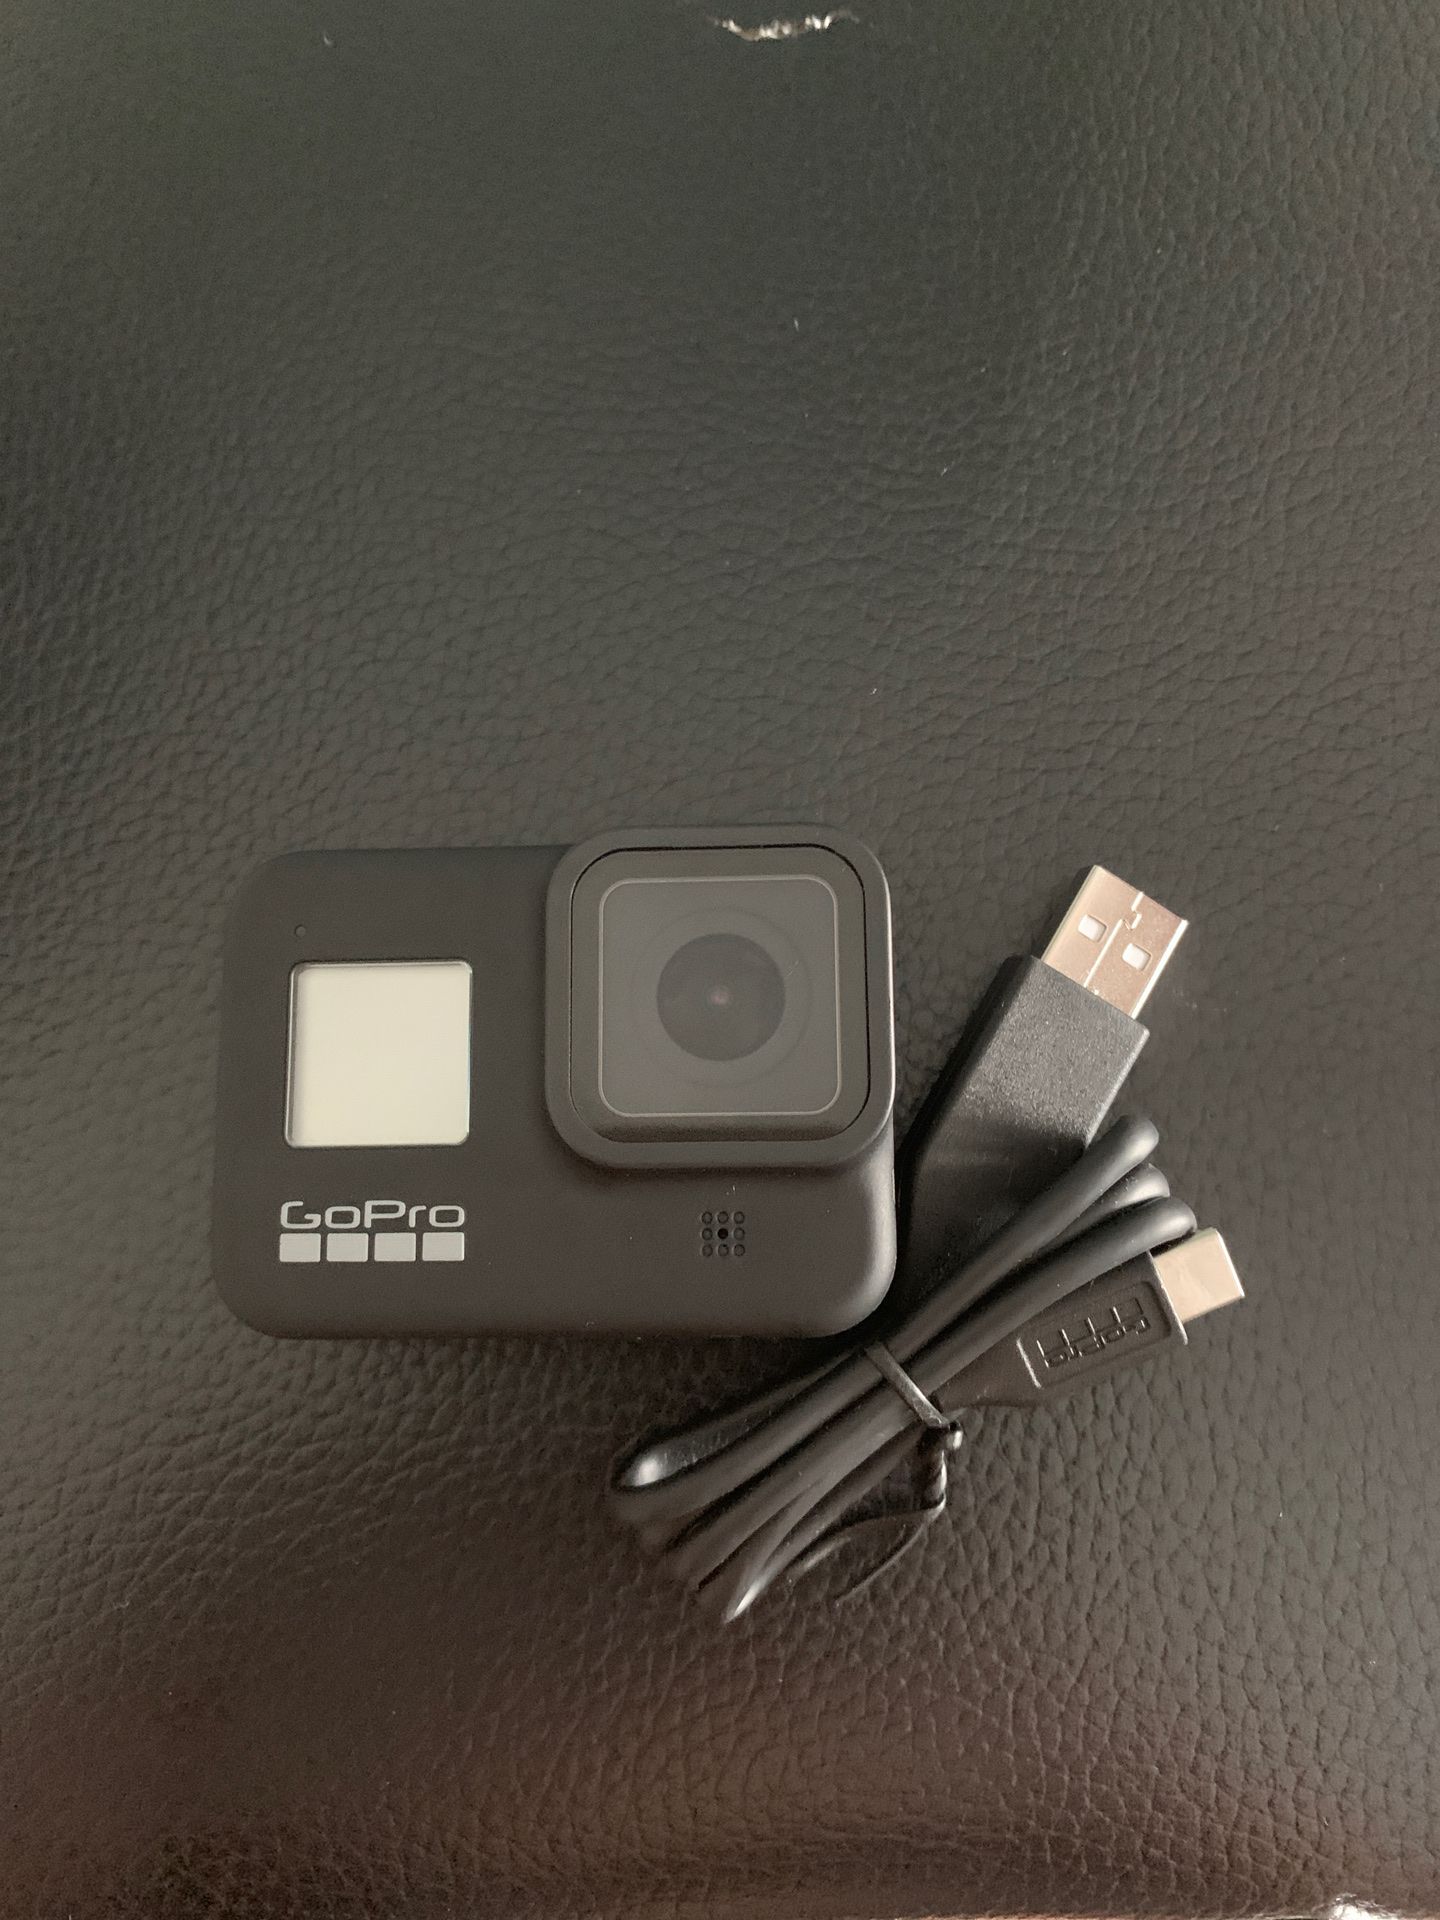 GoPro 8 black great condition works perfect comes with charger and mount